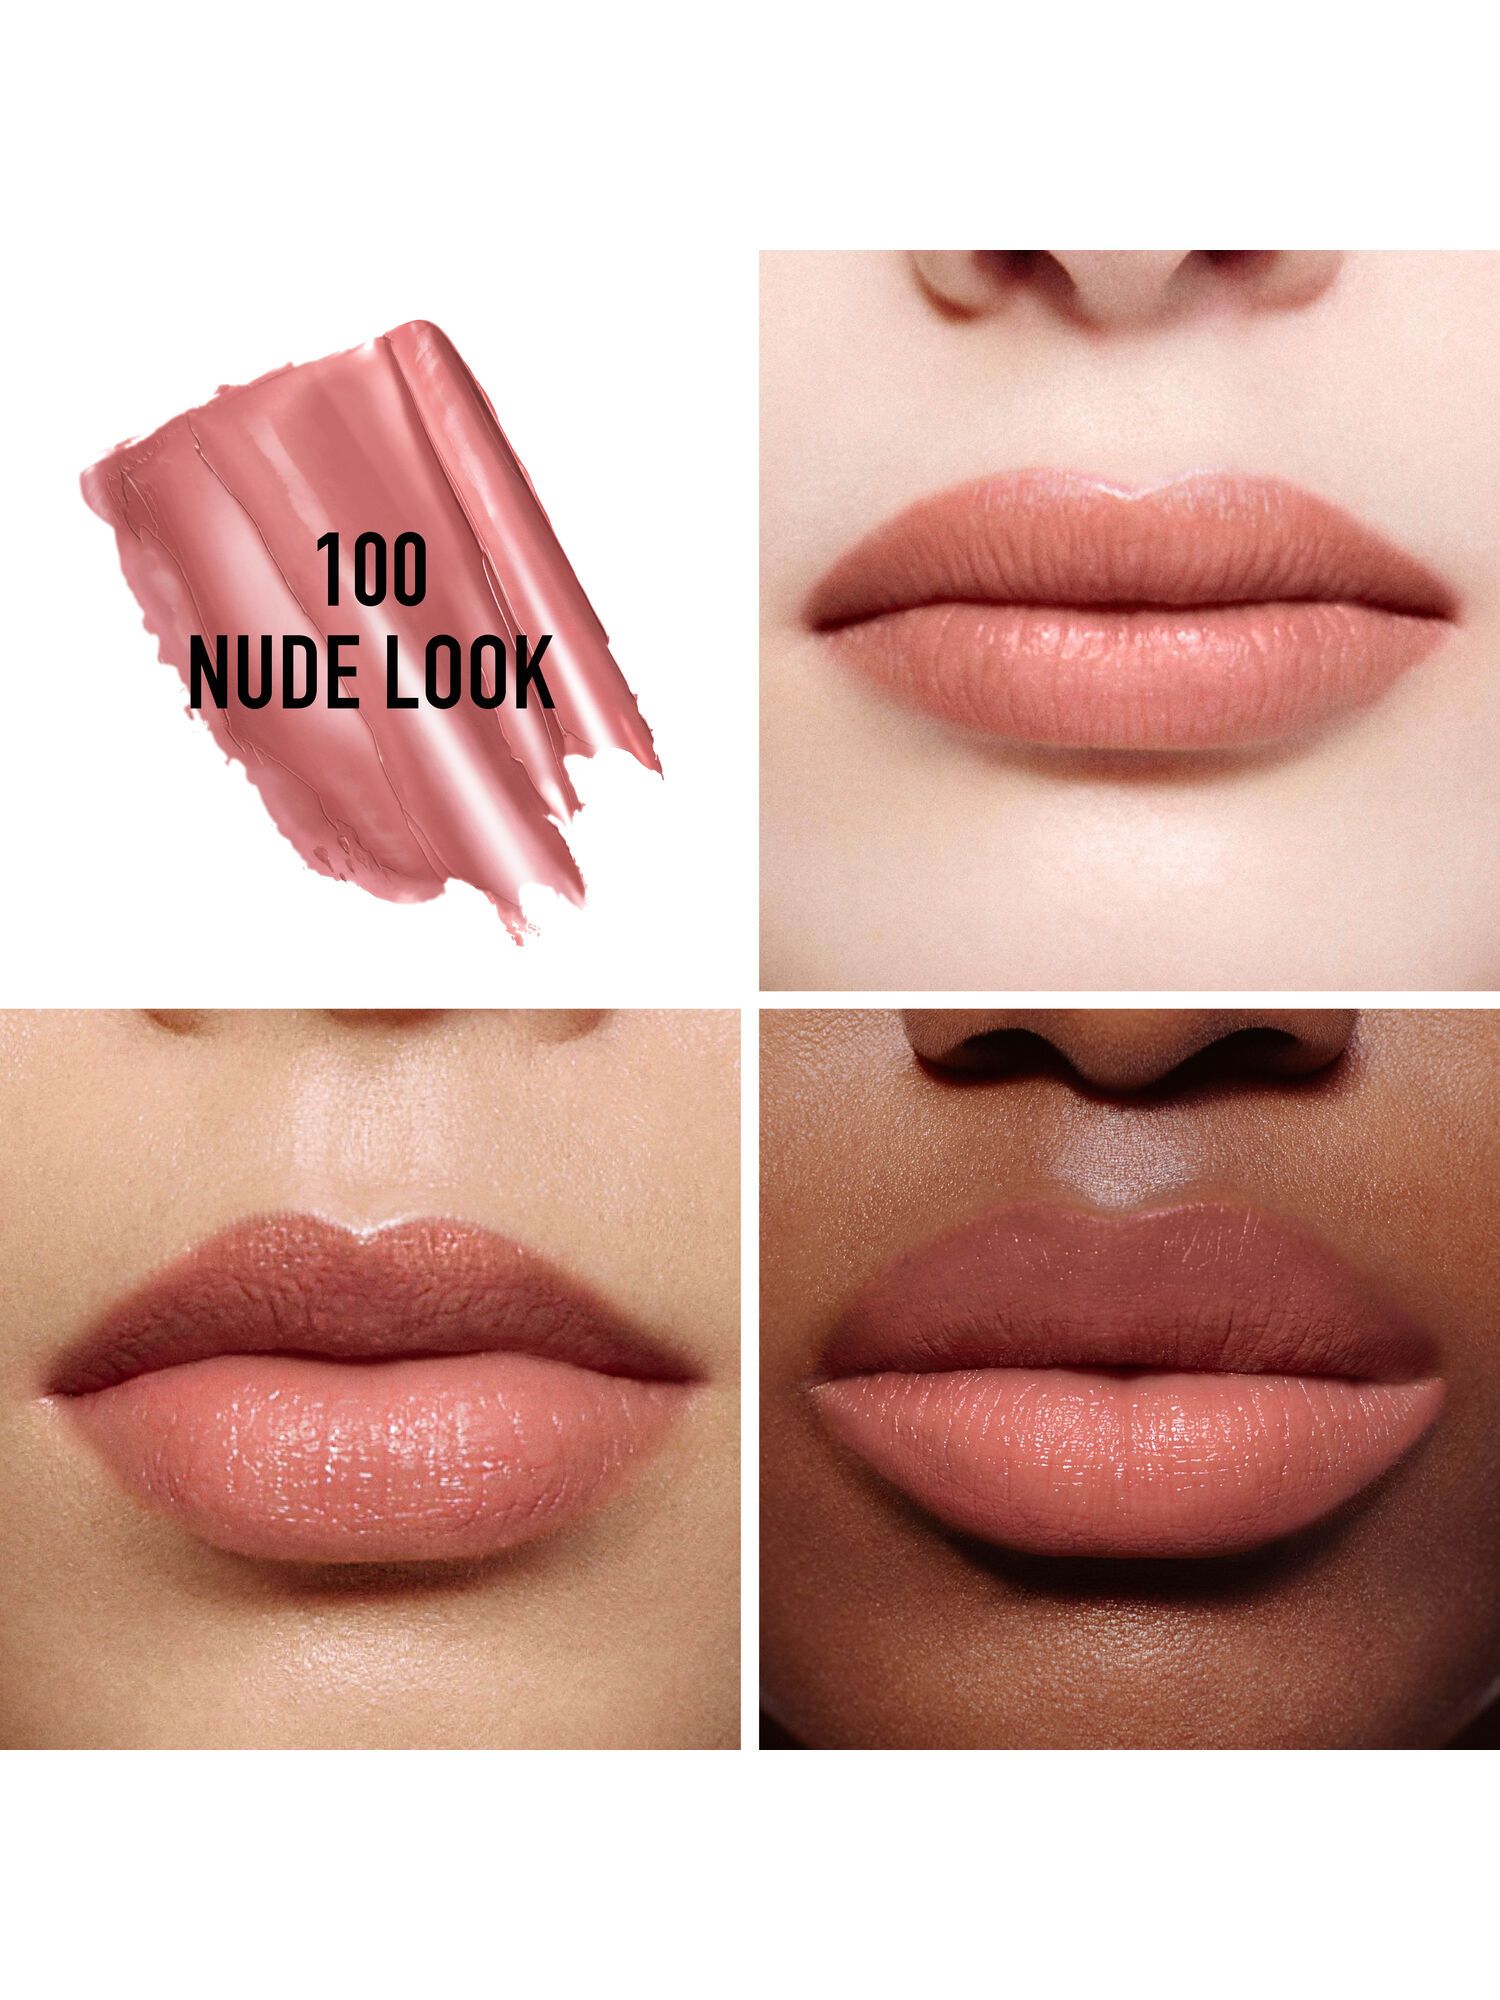 Dior Rouge Dior Coloured Lip Balm 100 Nude Look Satin At John Lewis And Partners 